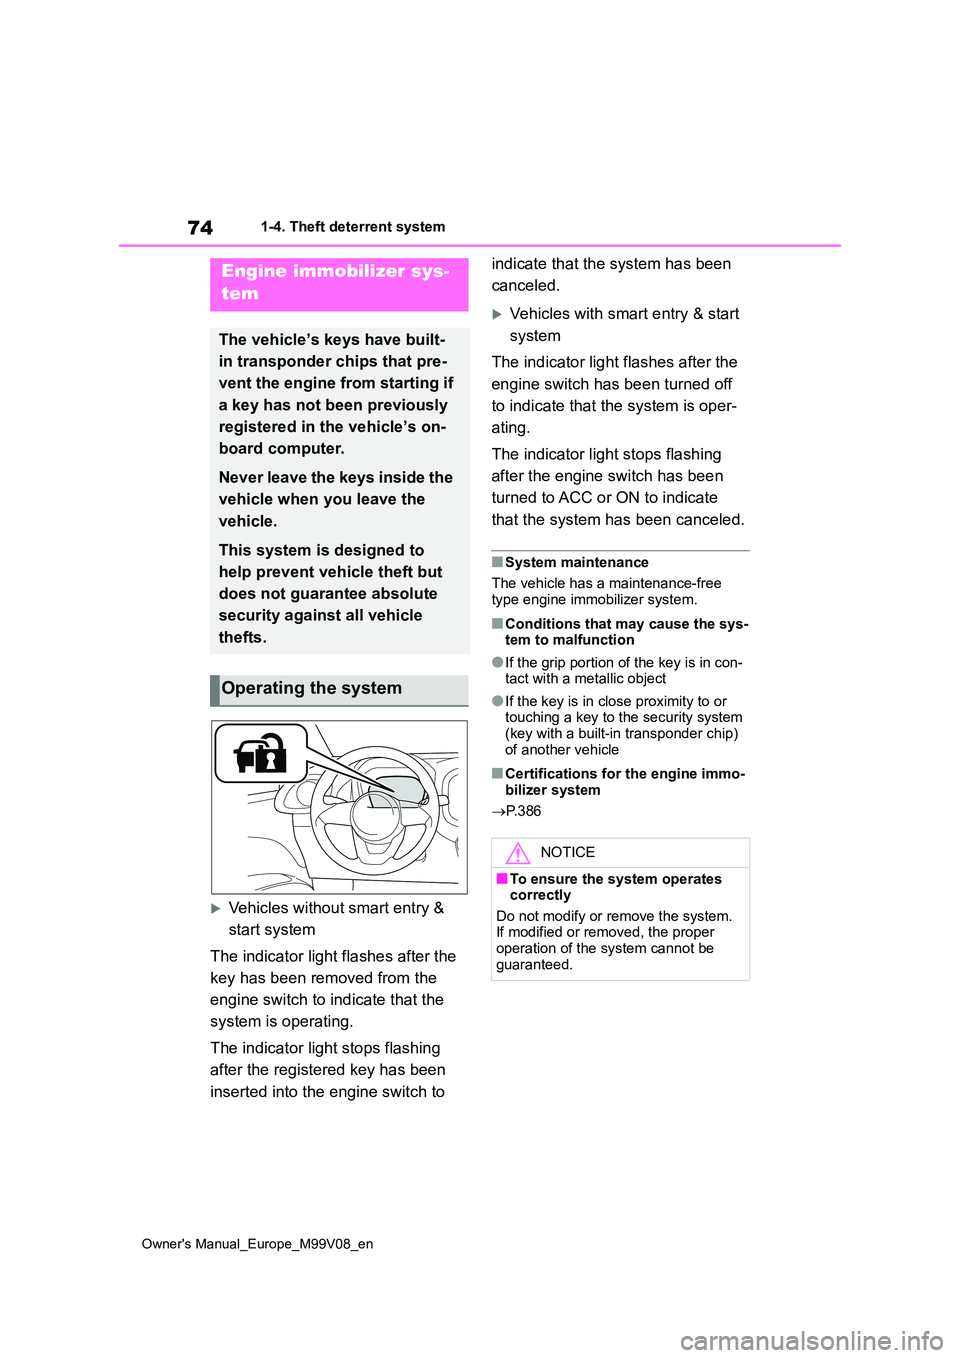 TOYOTA AYGO X 2022  Owners Manual (in English) 74
Owner's Manual_Europe_M99V08_en
1-4. Theft deterrent system
1-4.Theft de terre nt sys te m
Vehicles without smart entry &  
start system 
The indicator light flashes after the  
key has been